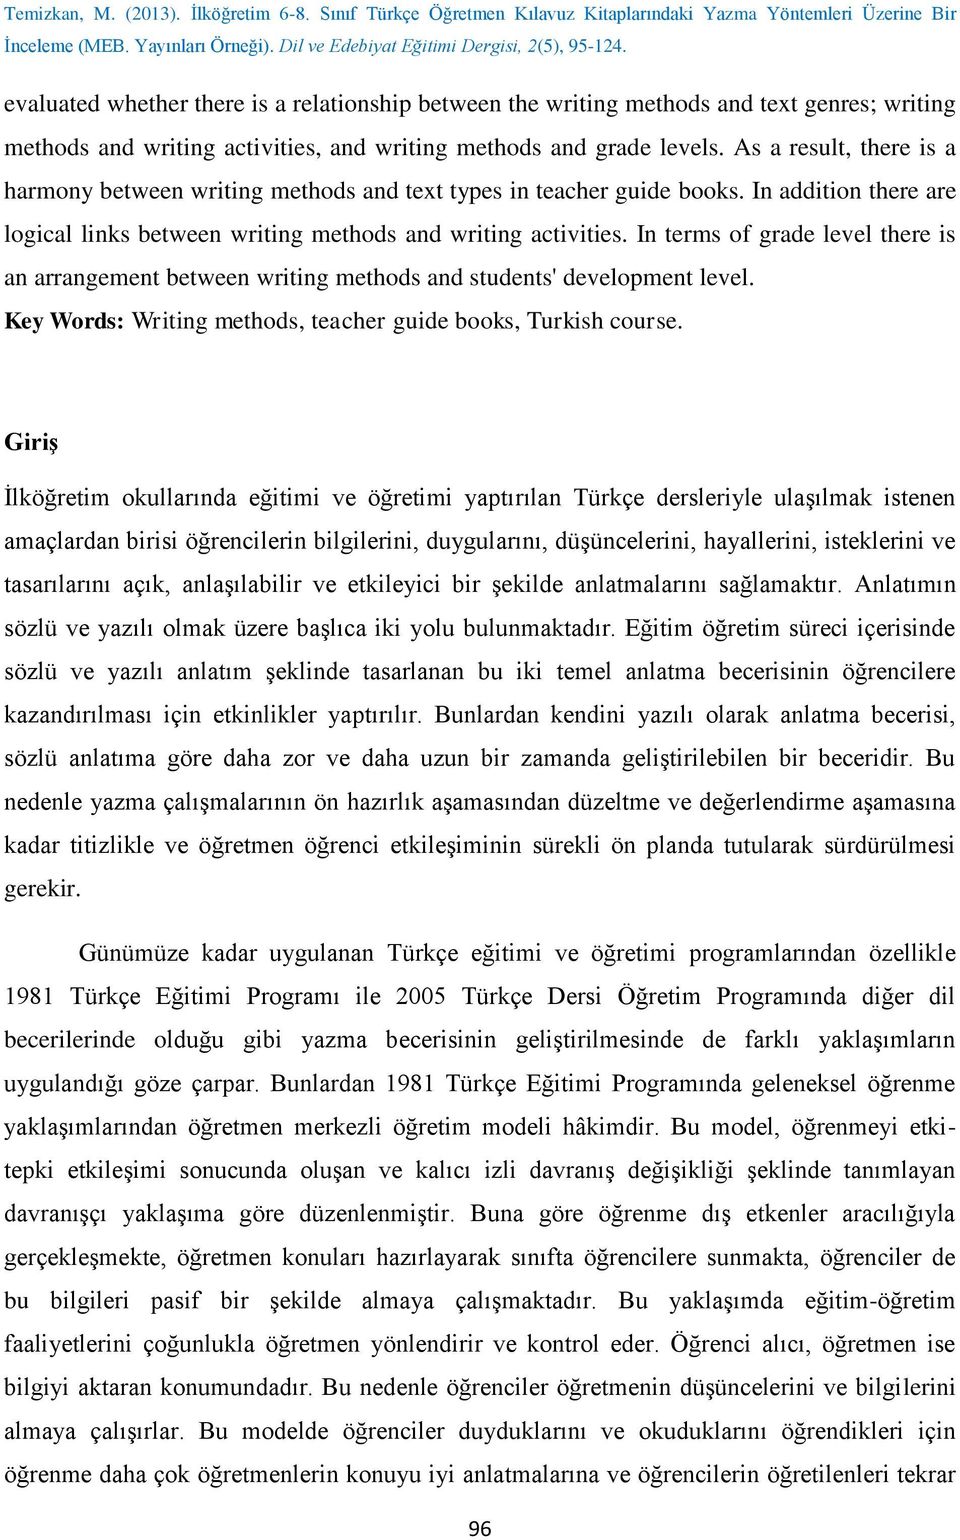 In terms of grade level there is an arrangement between writing methods and students' development level. Key Words: Writing methods, teacher guide books, Turkish course.